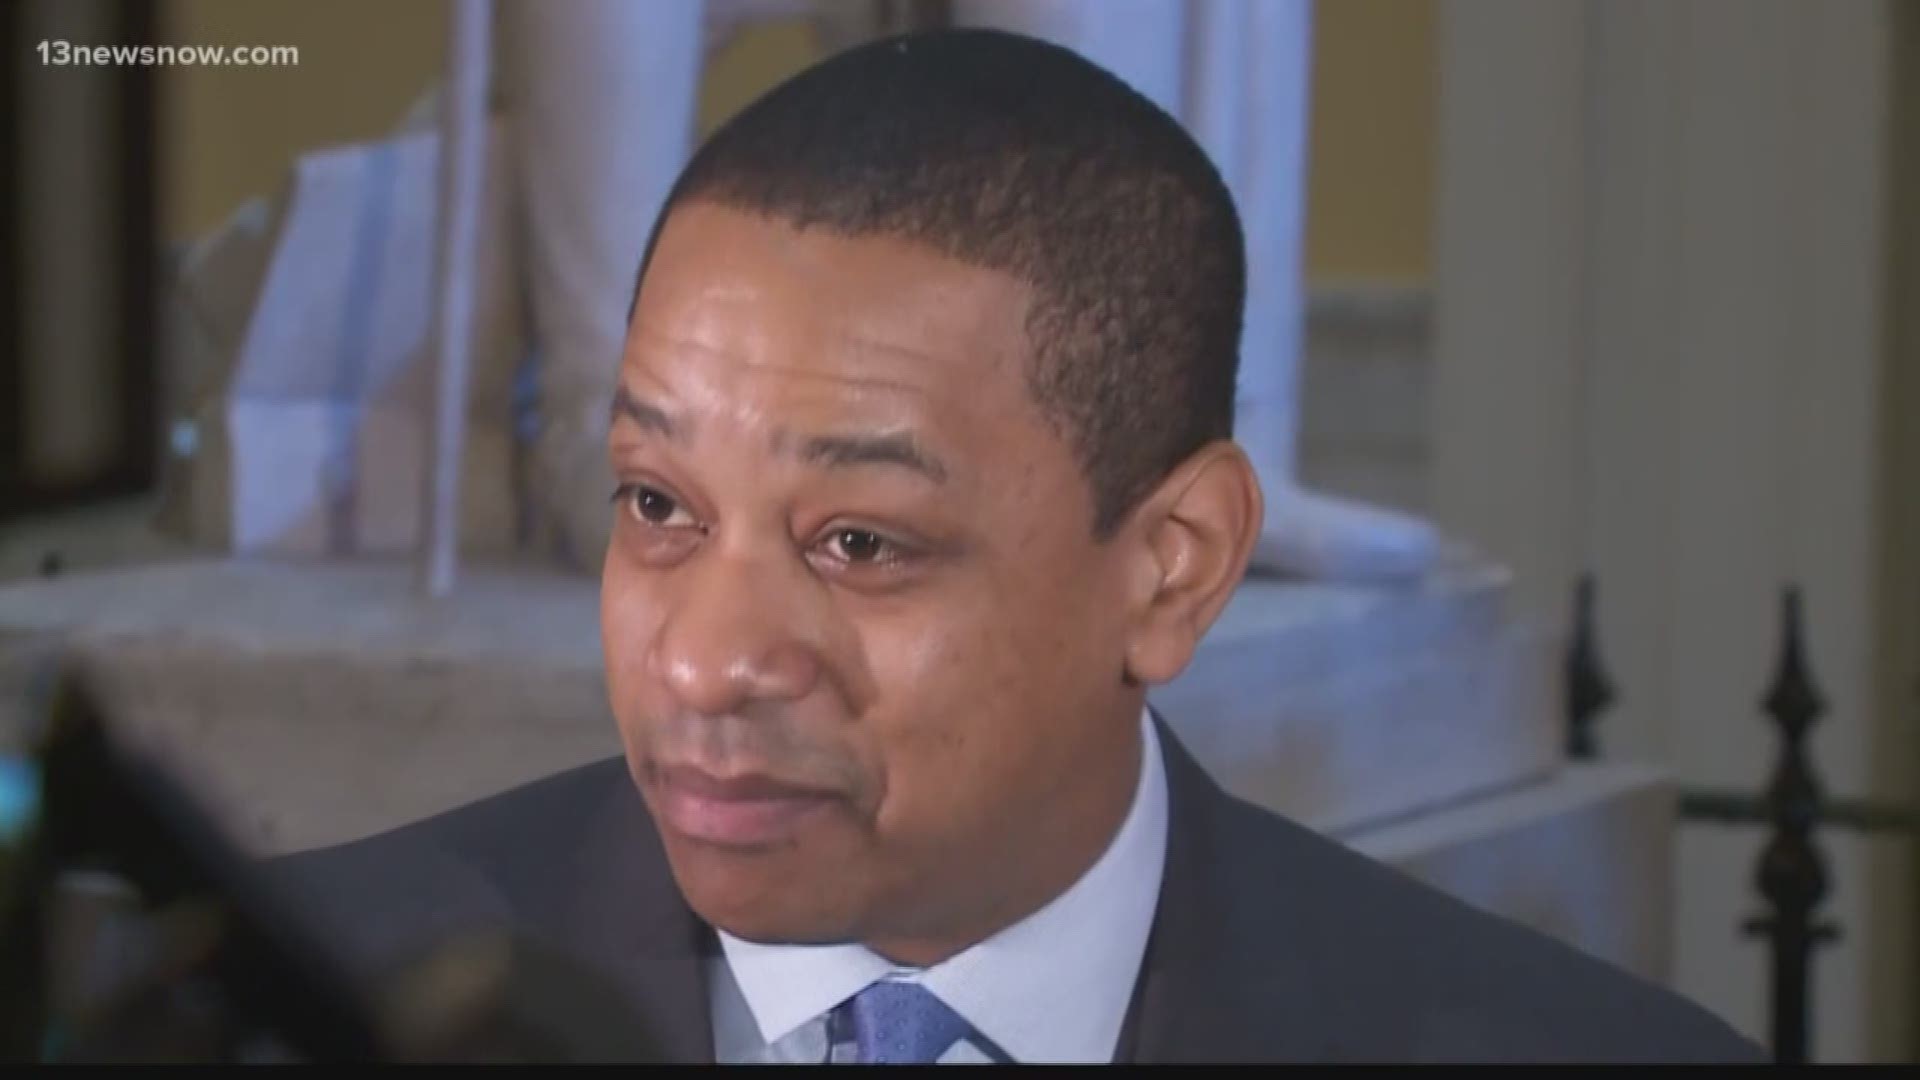 Lieutenant Governor Justin Fairfax is denying sexual assault allegations made agianst him as Northam is facing calls to resign after a racist photo was released from his 1984 EVMS yearbook.